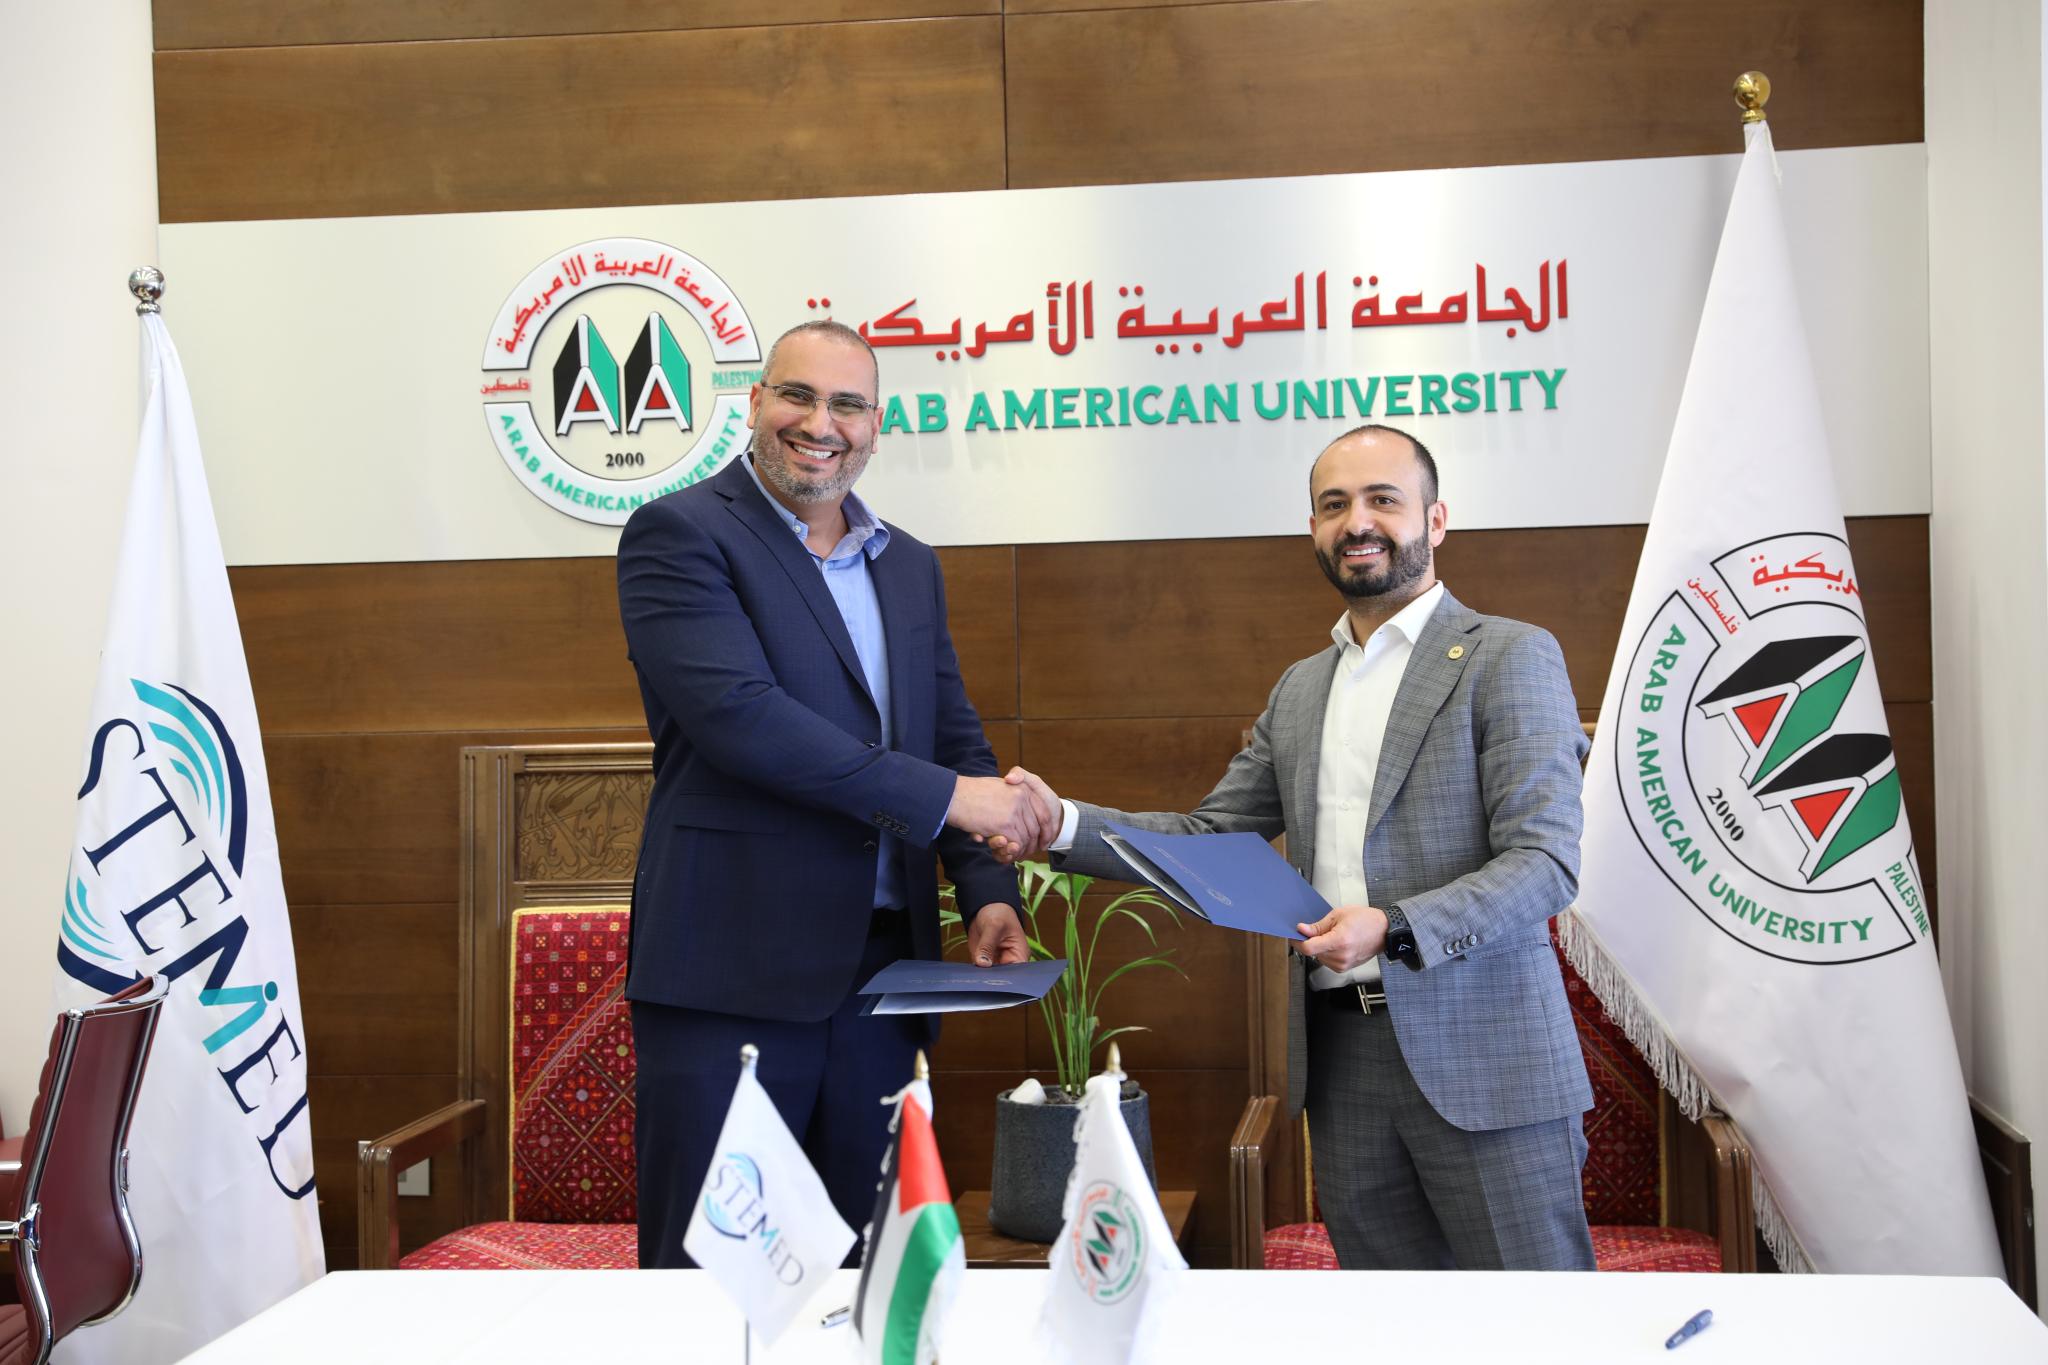 The Arab American University Signs a Cooperation Agreement with ASTEMIED Company for Medical and Hearing Solutions